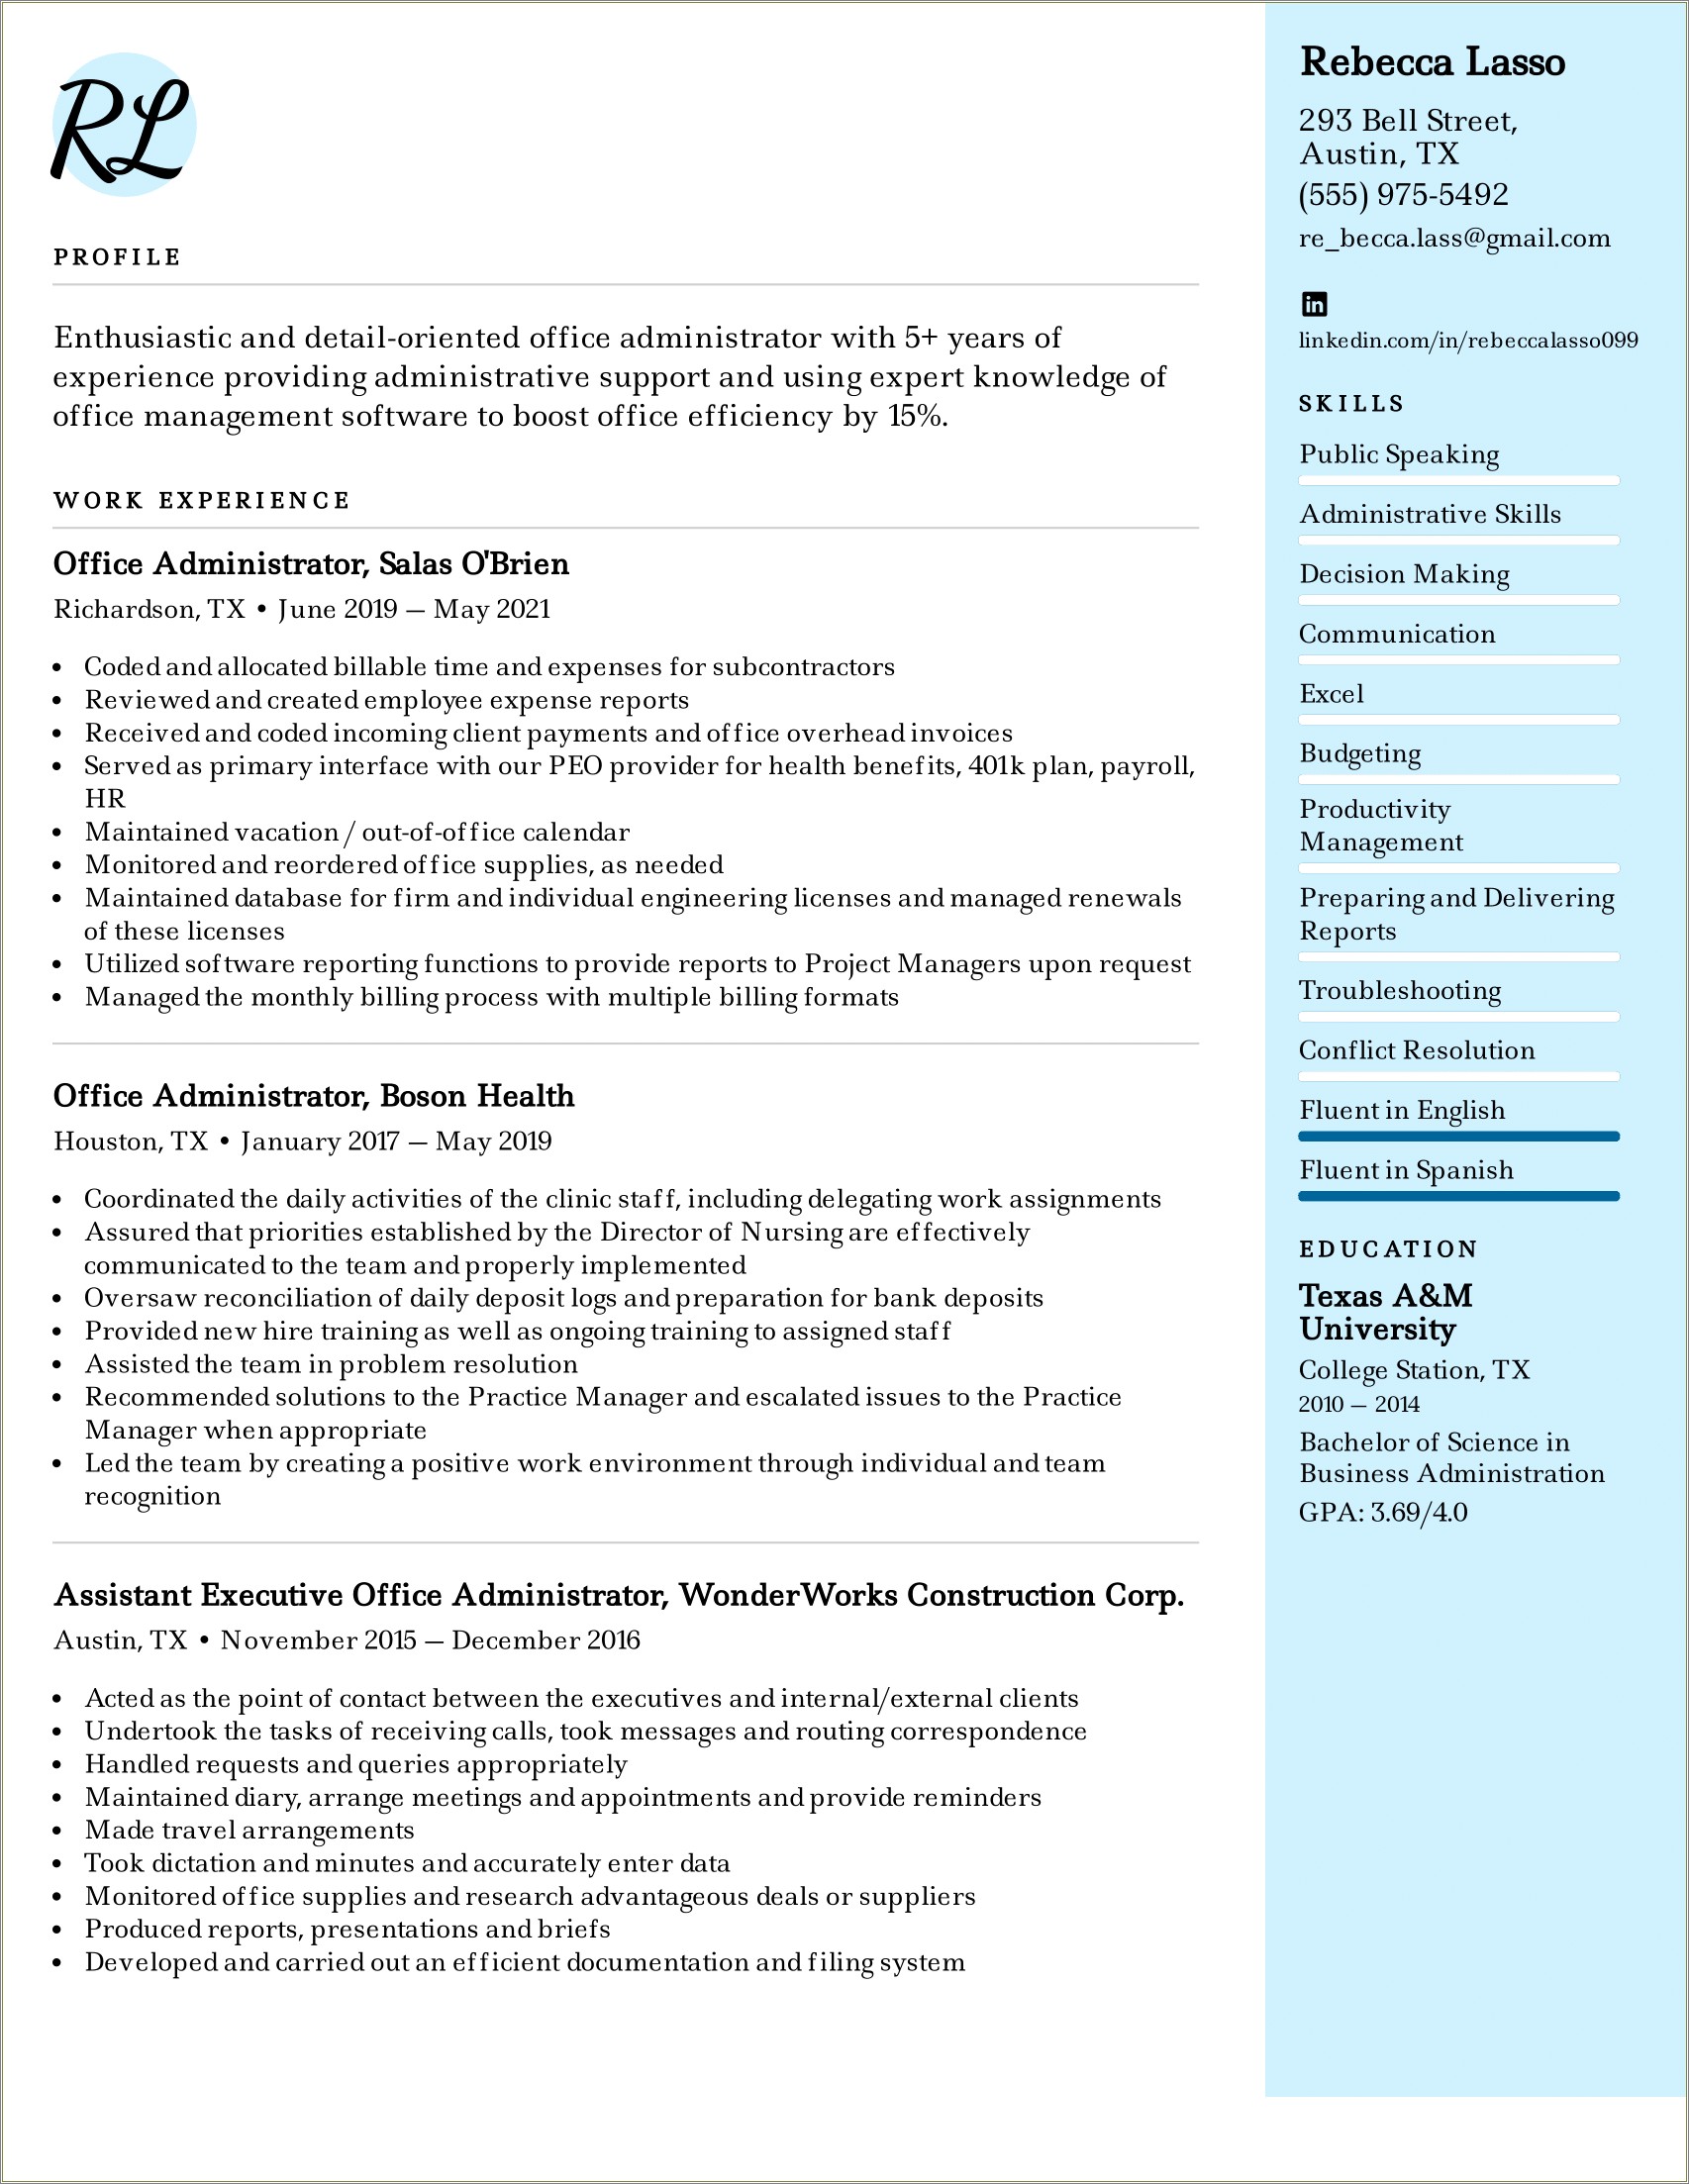 Examples Of Resumes For Educational Administrators